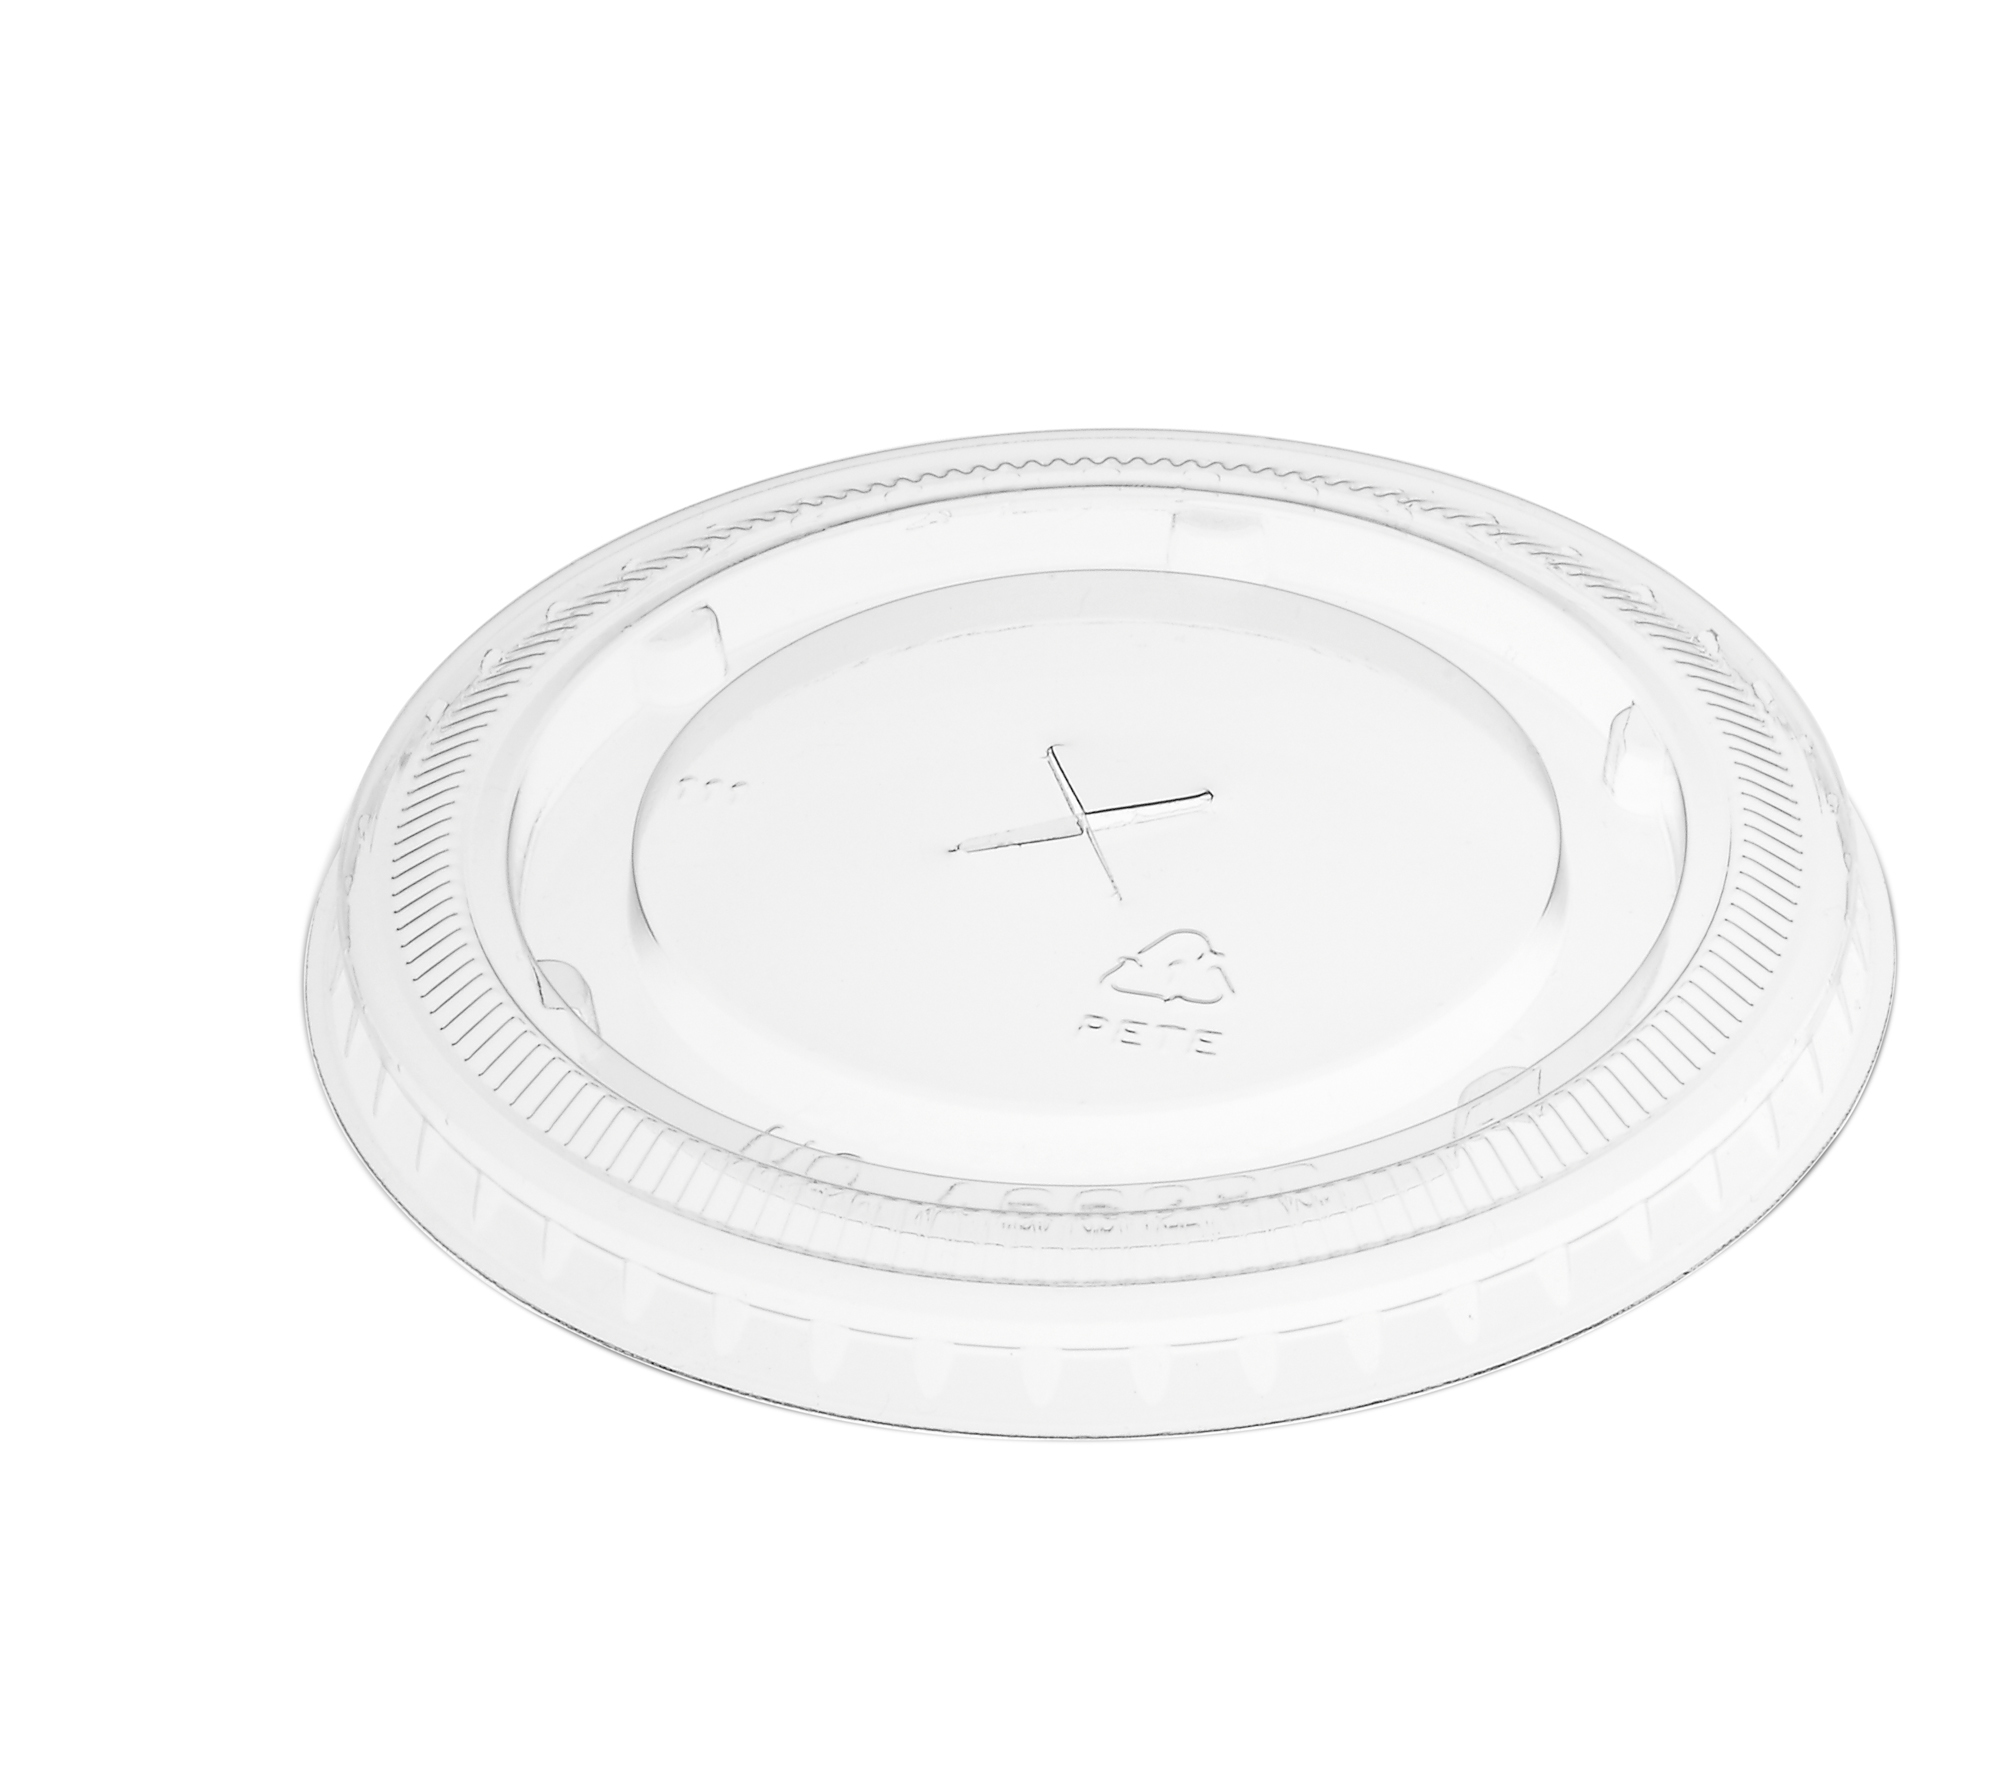 isolated clear drinking cup lid with straw hole